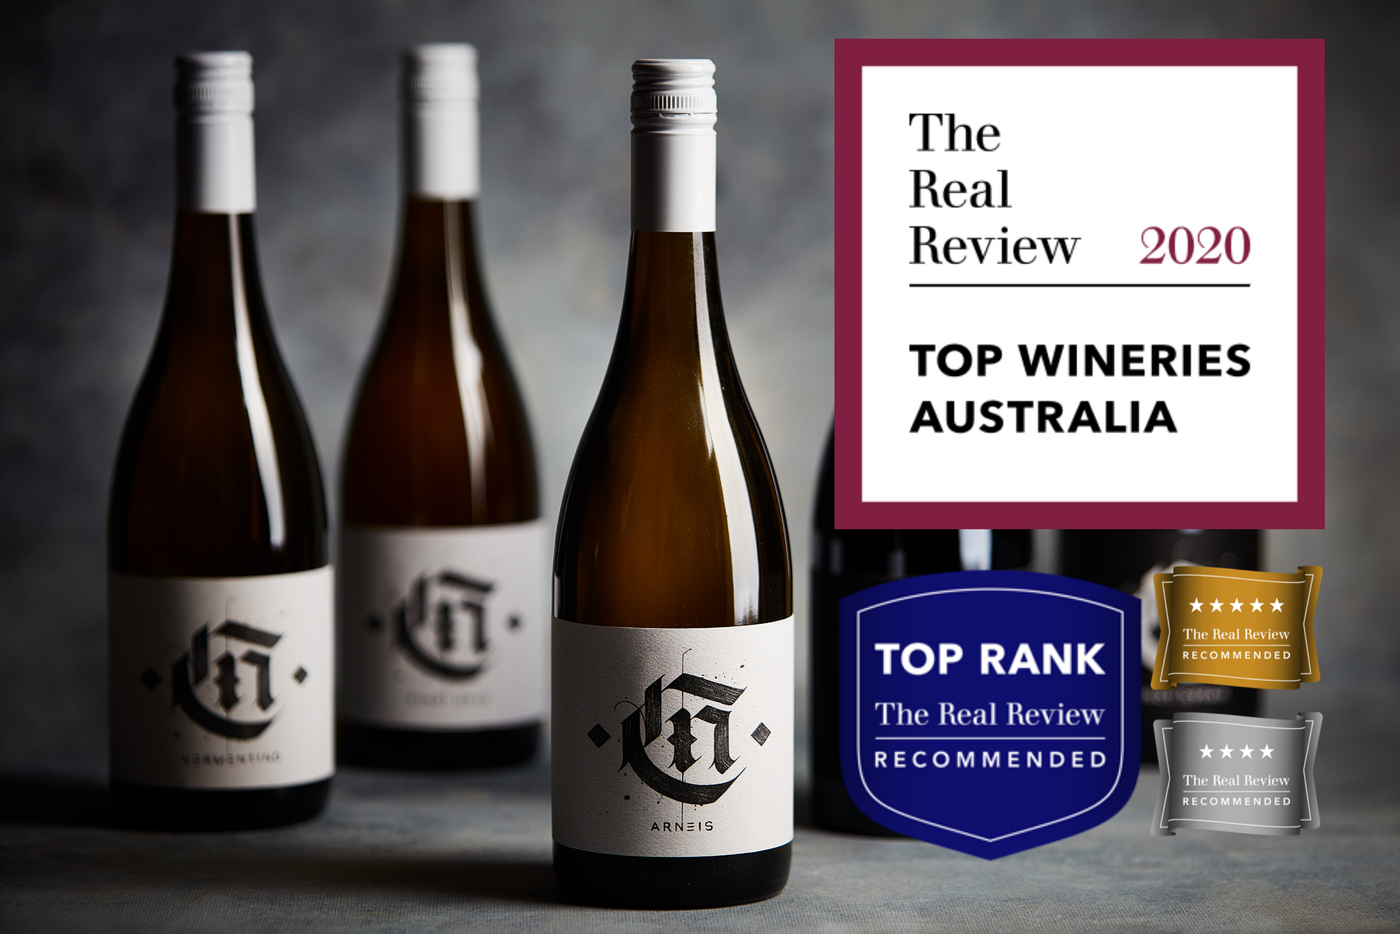 The Real Review Top Wineries of Australia 2020